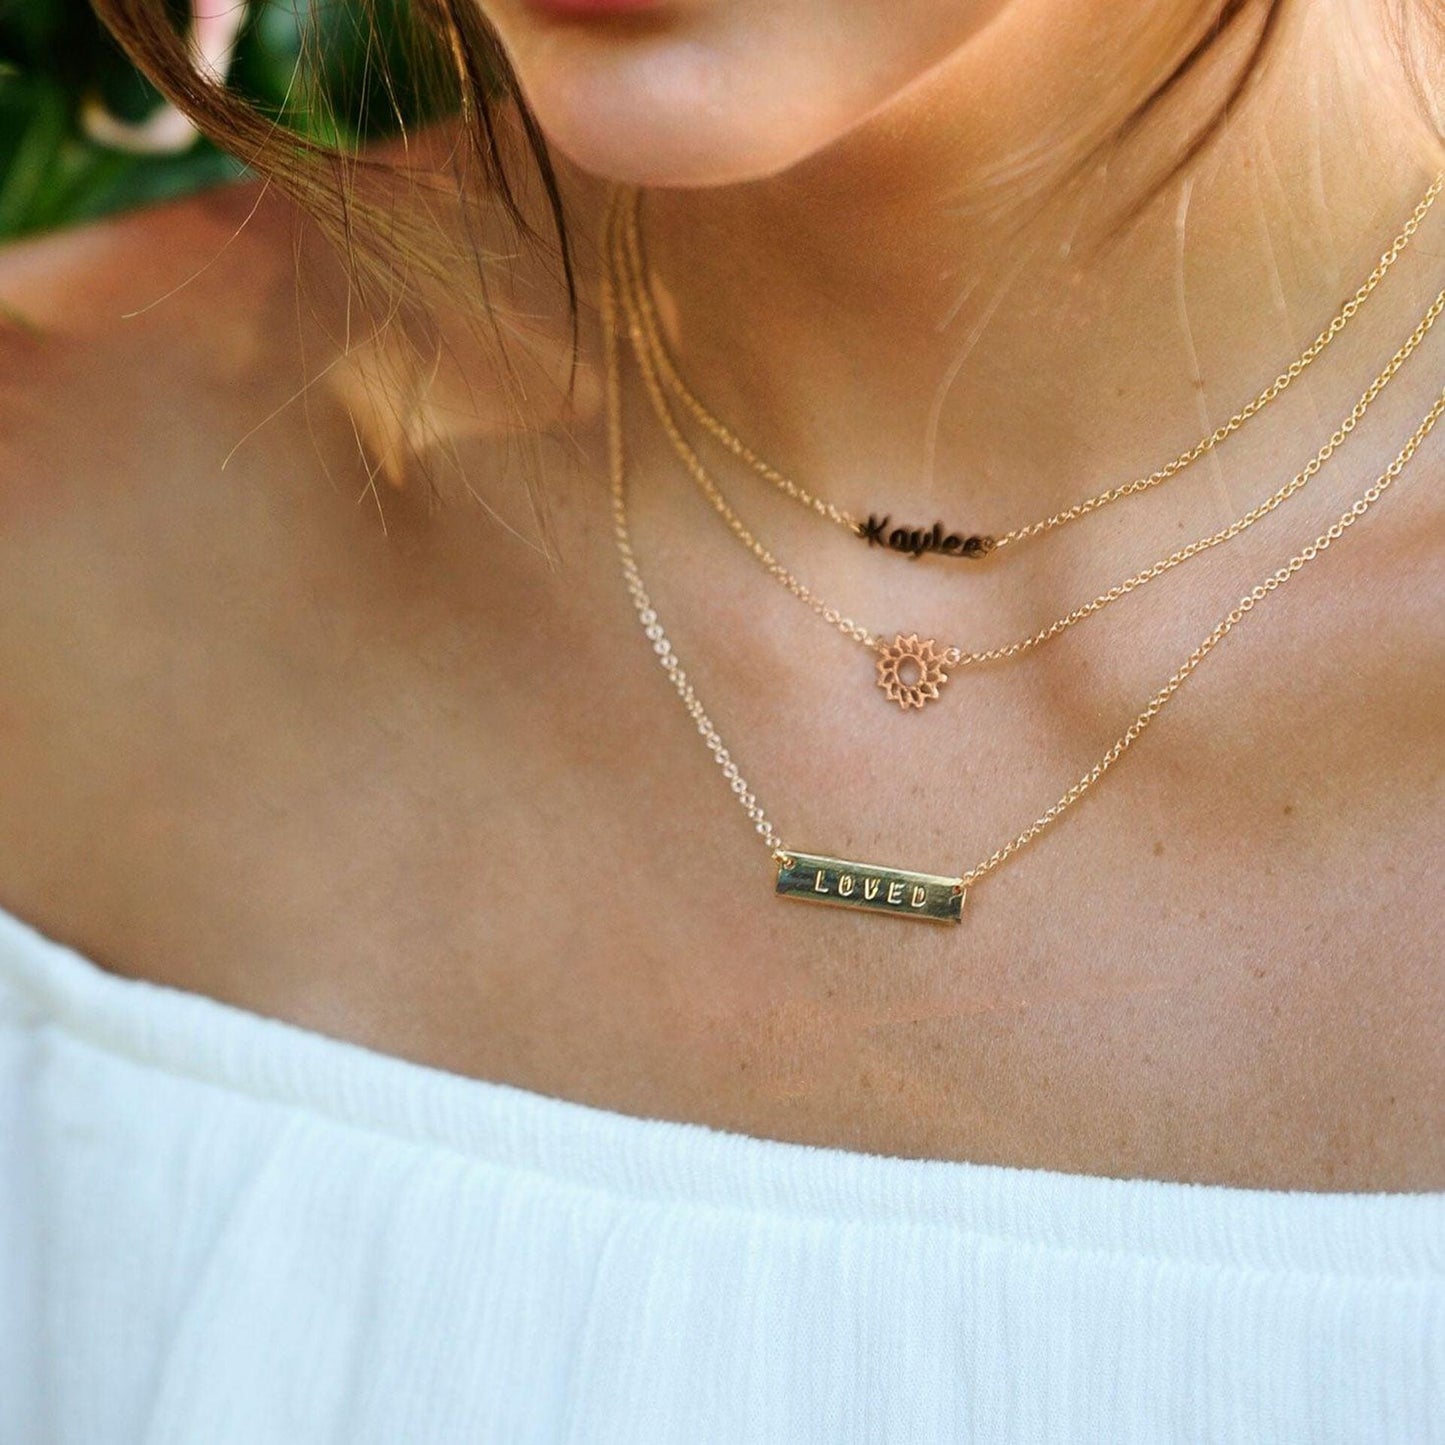 Lumiela Personalized Nameplate Emily Necklace in Gold Tone